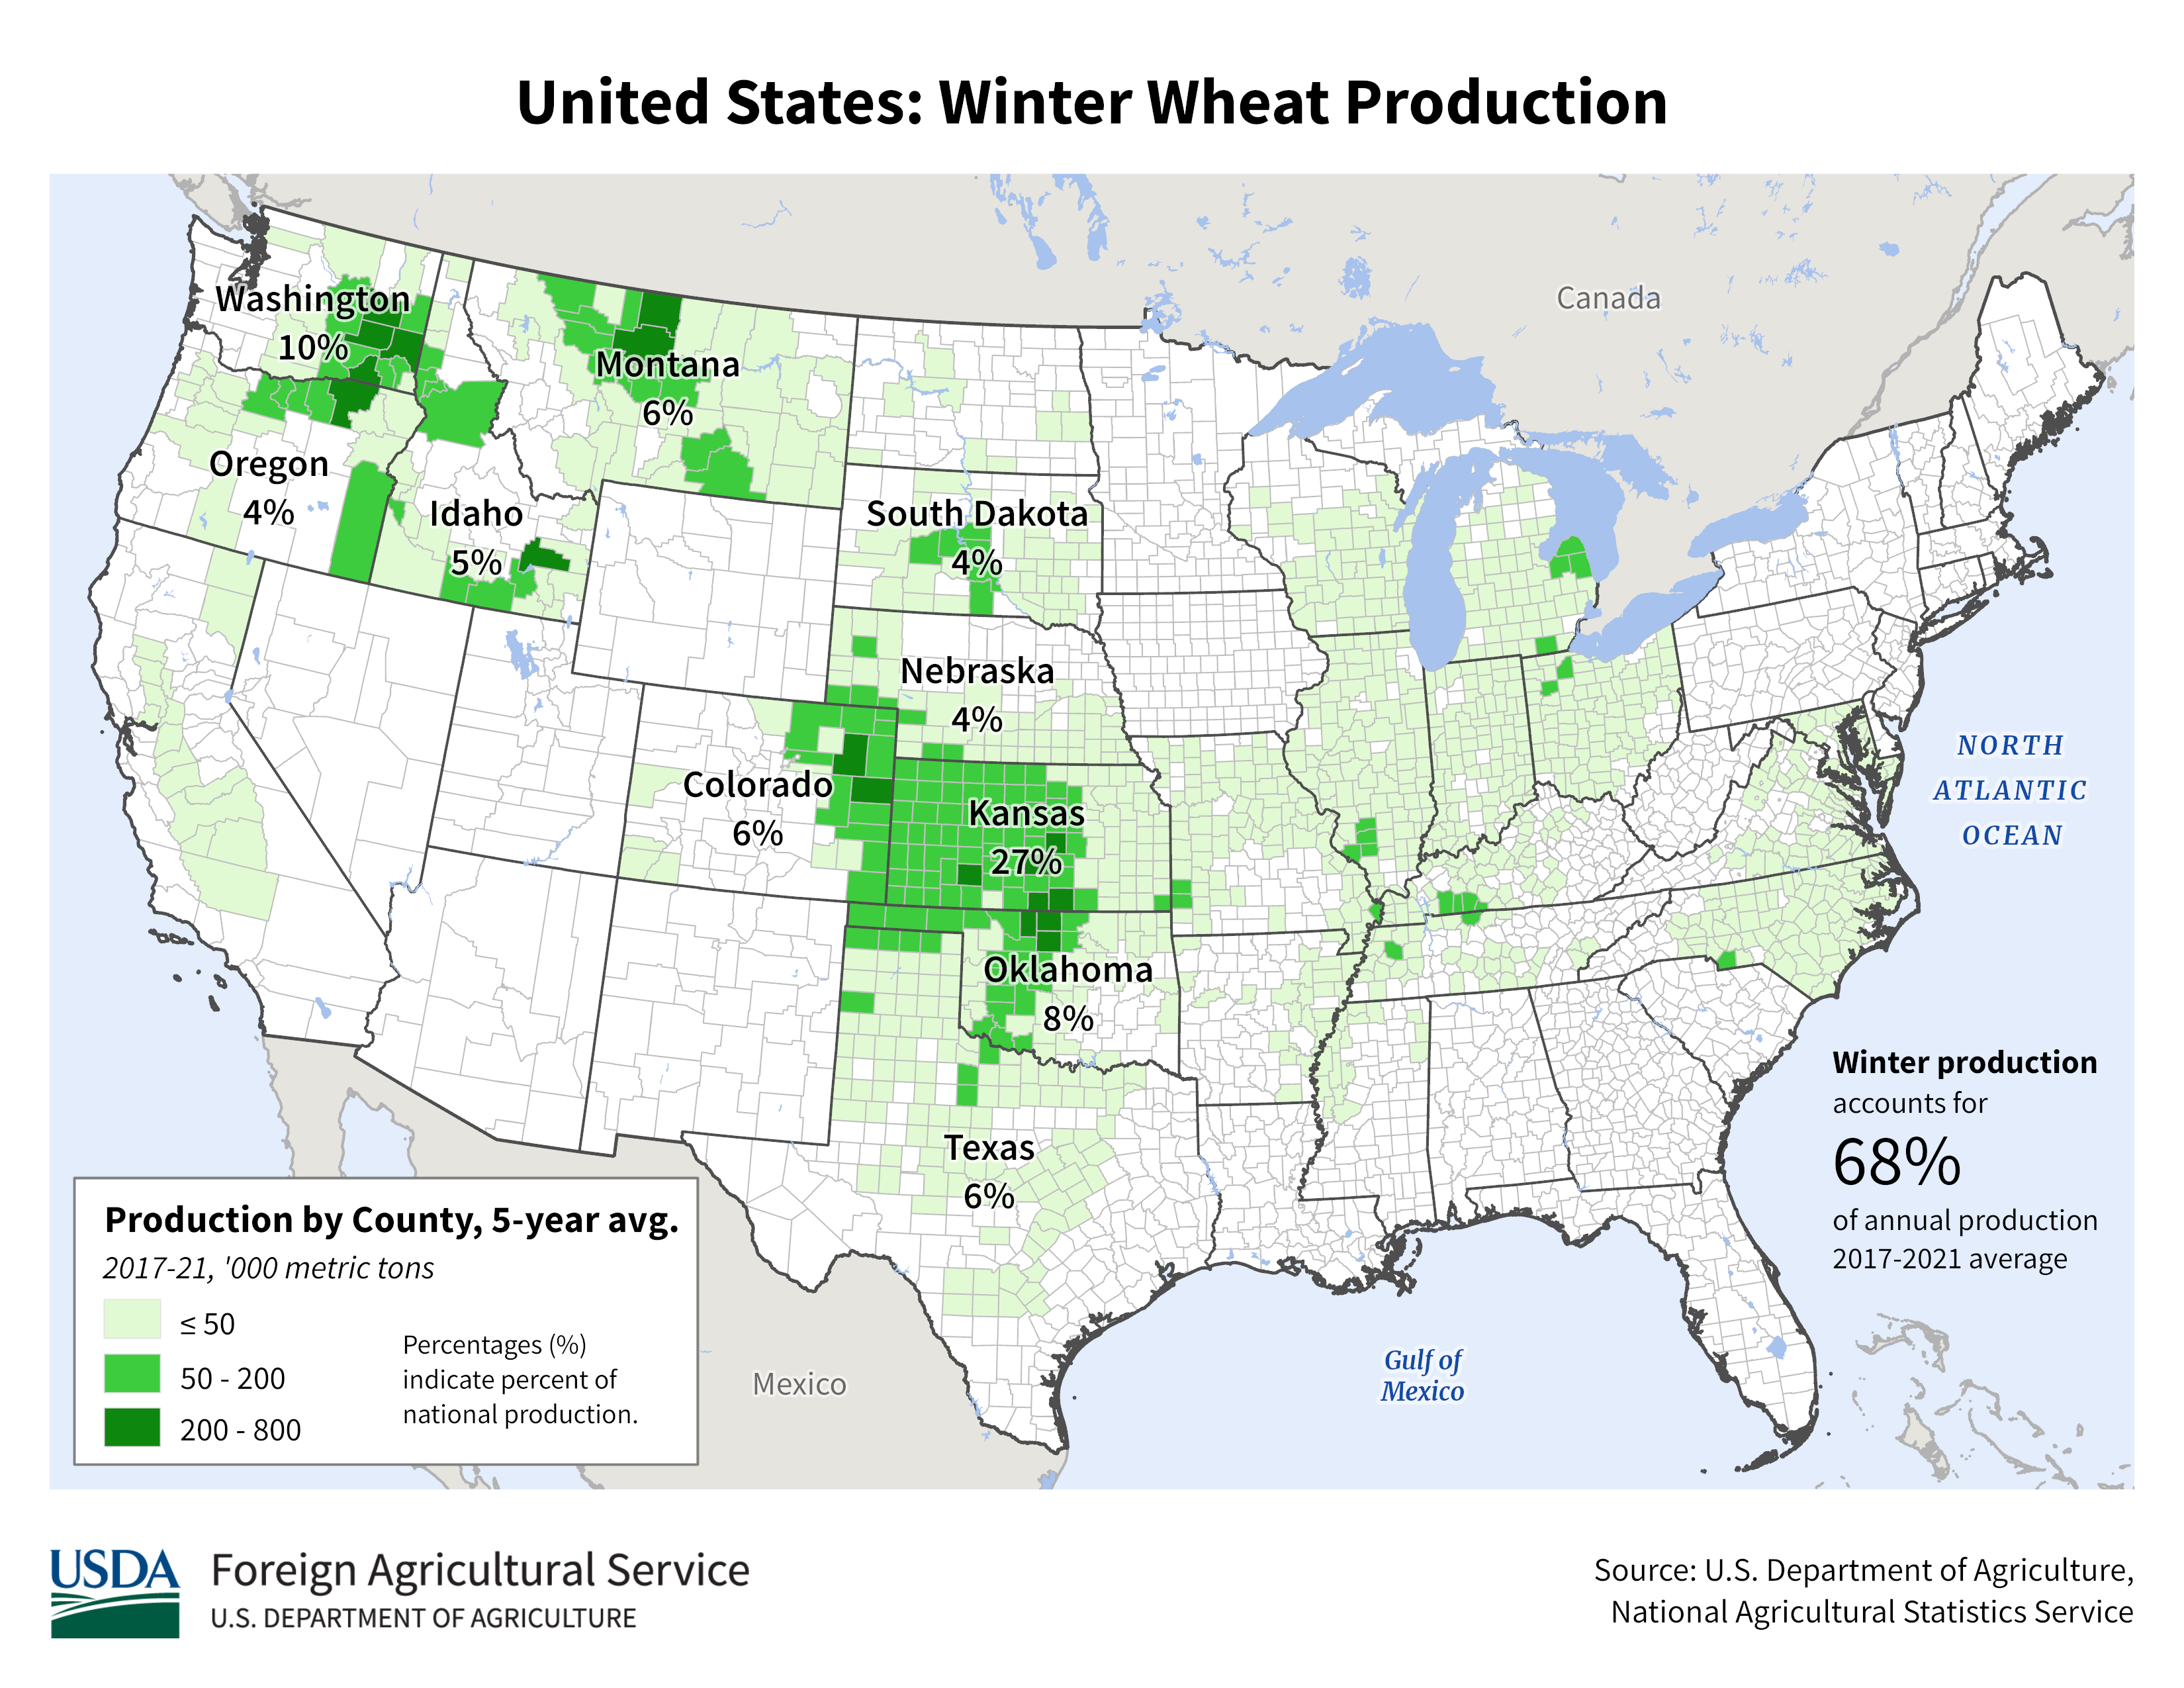 https://ipad.fas.usda.gov/rssiws/al/crop_production_maps/US/USA_Winter_Wheat.png